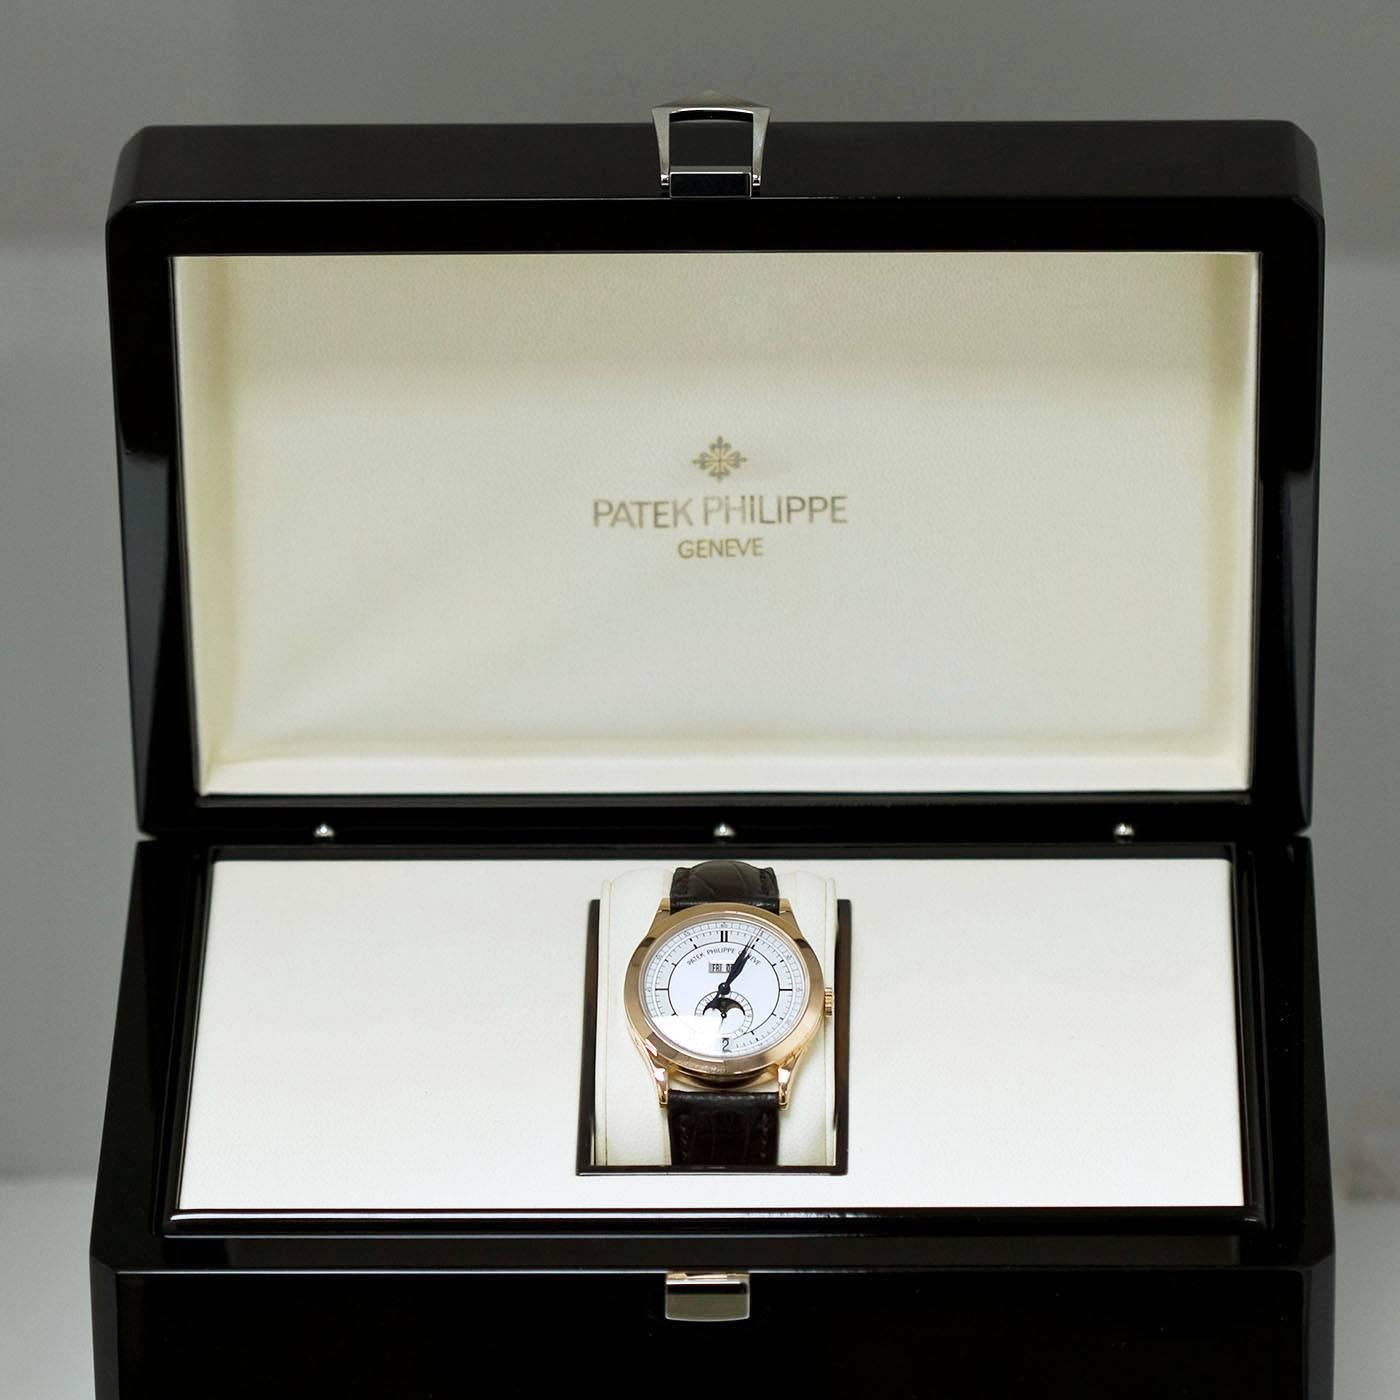 This Patek Philippe watch is in very good to excellent condition. Annual Calendar and Moon Phases. 18k rose gold case with transparent back. Patek 18k rose gold deployment buckle. 
Original brown exotic strap with slight creases. Comes with the